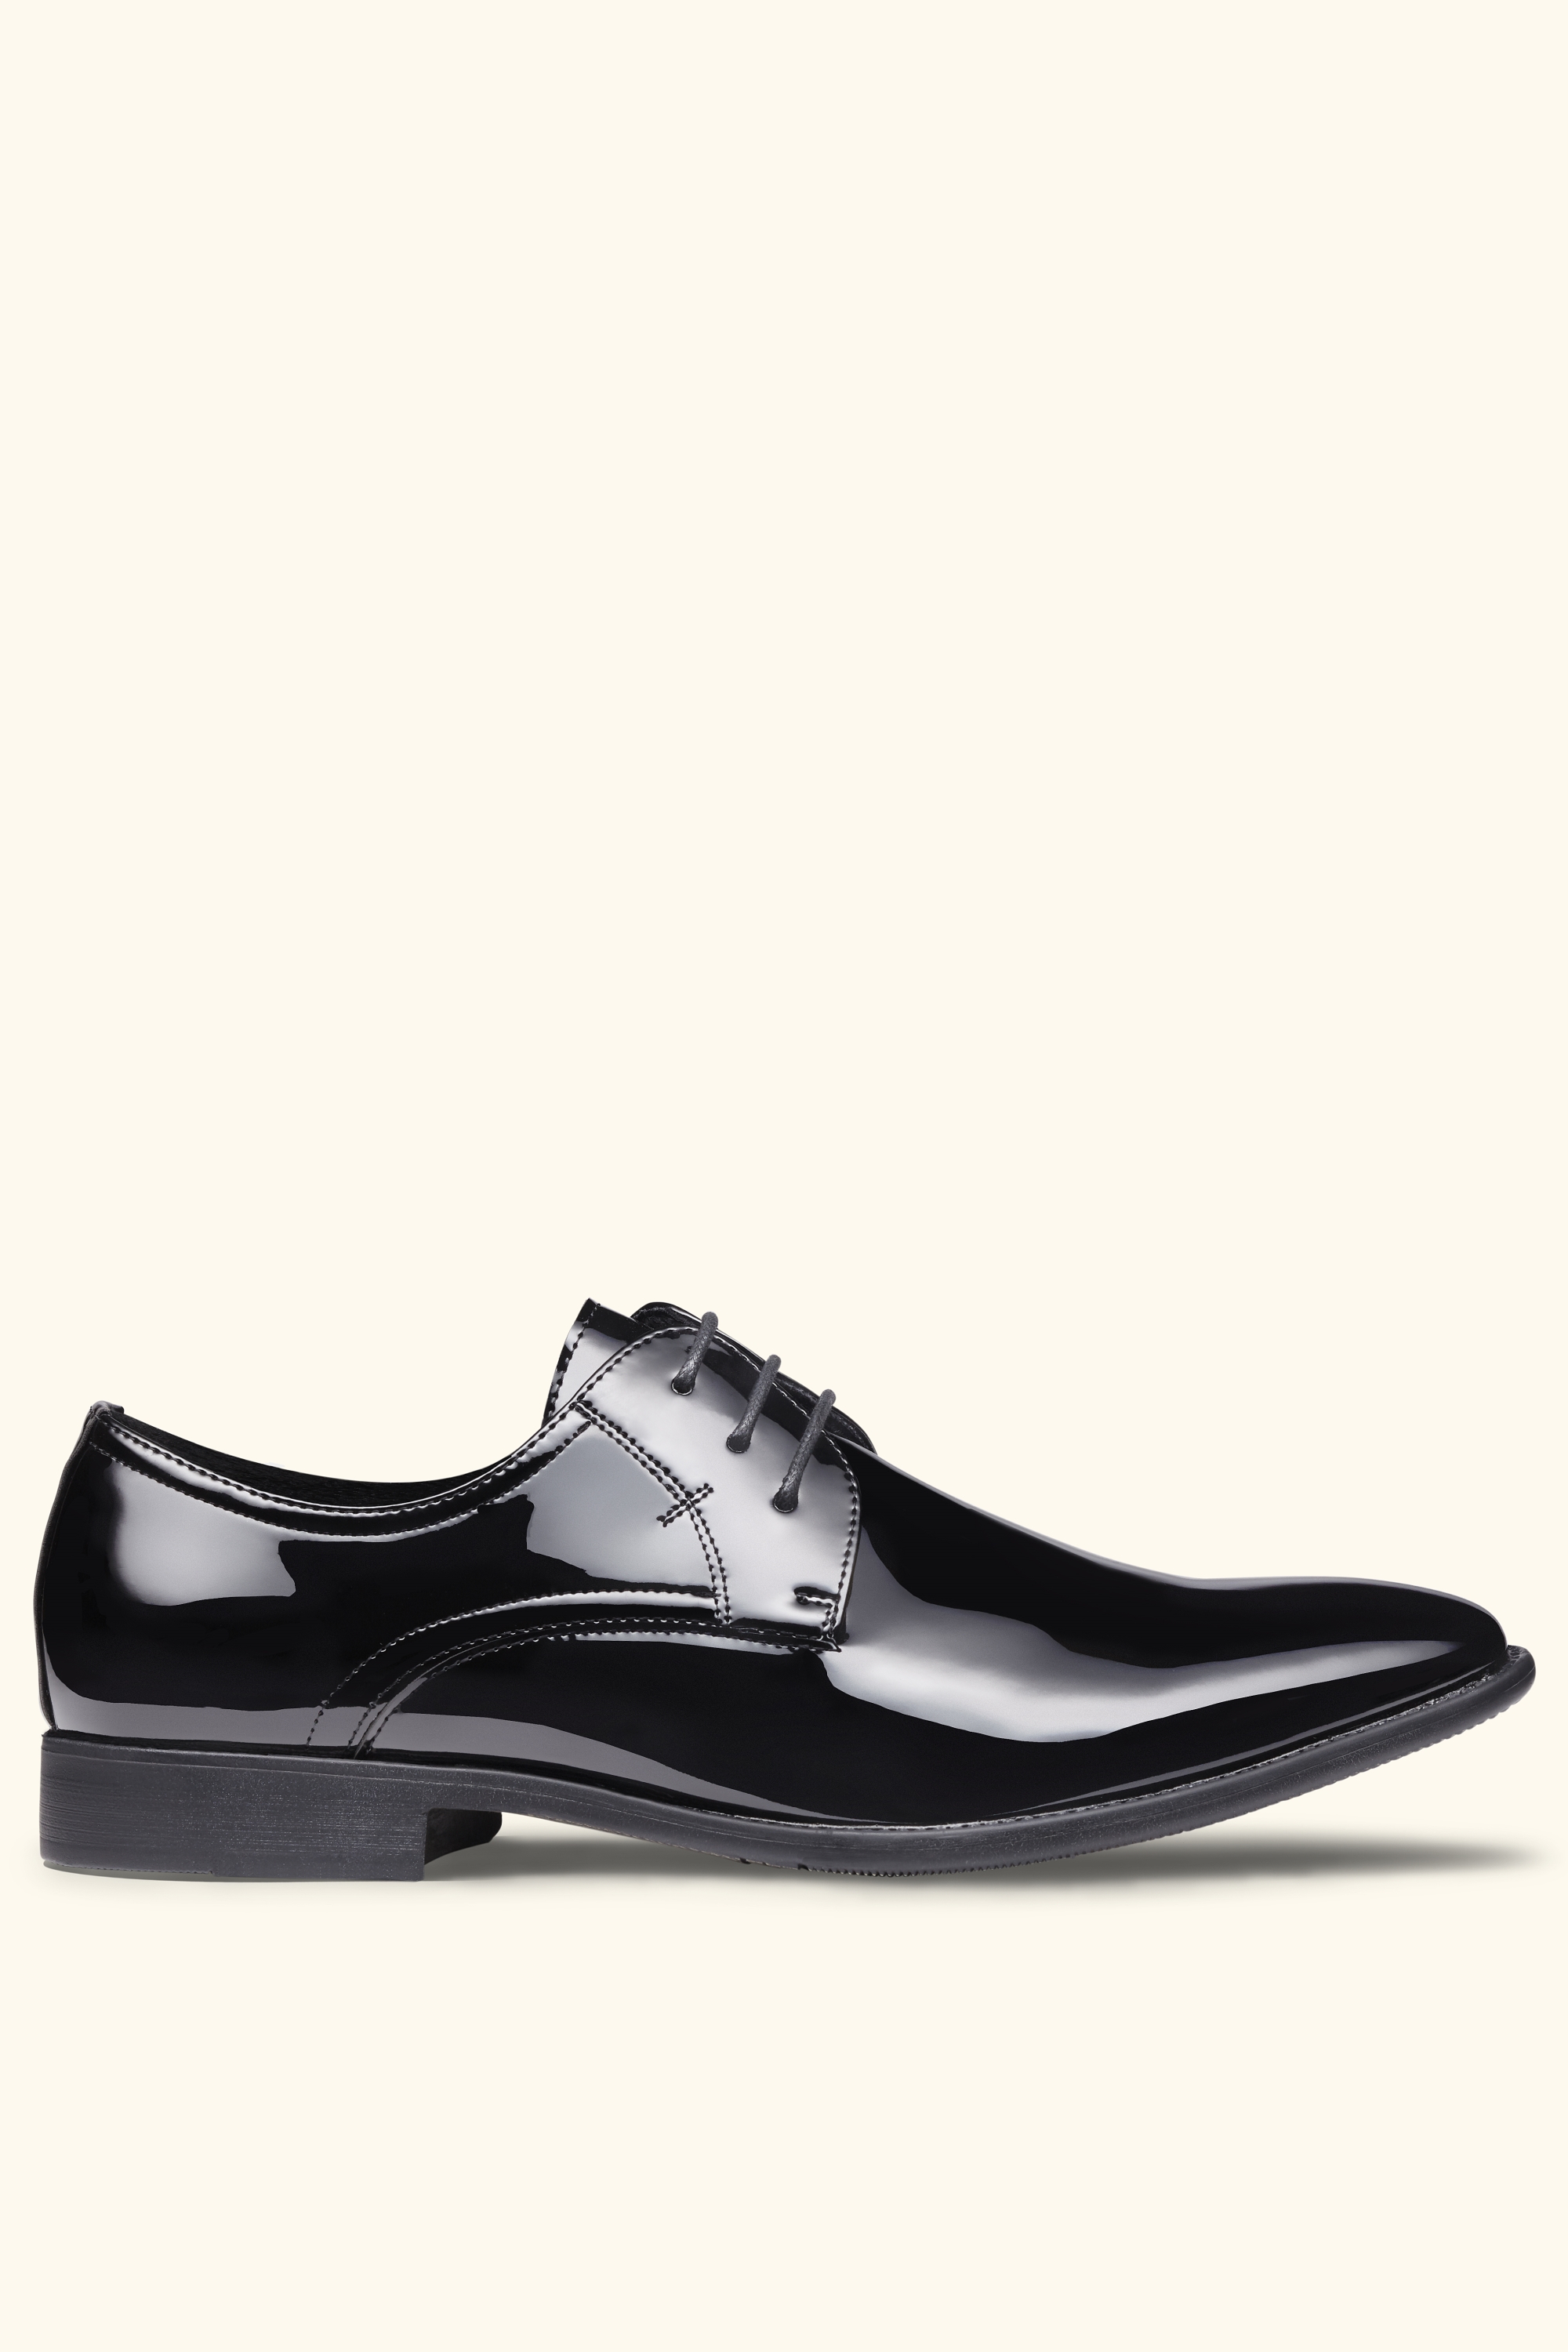 extra wide tuxedo shoes